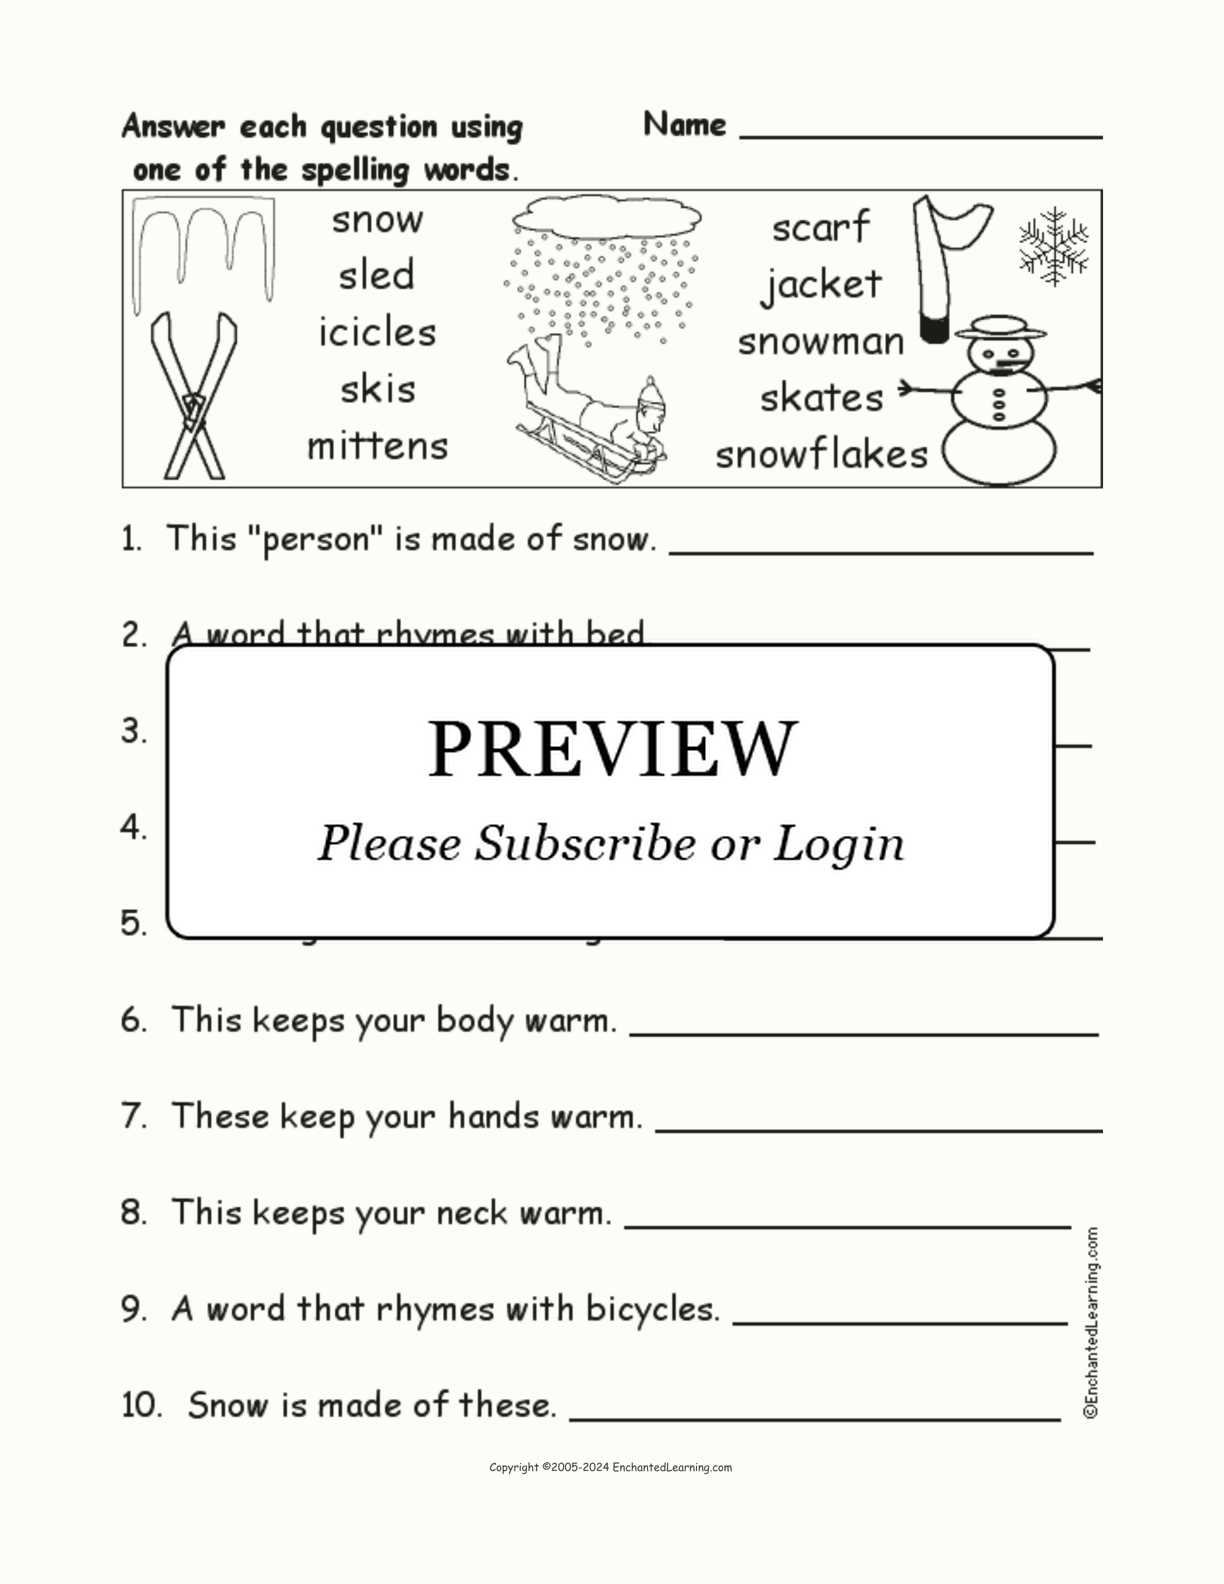 Winter Spelling Word Questions interactive worksheet page 1